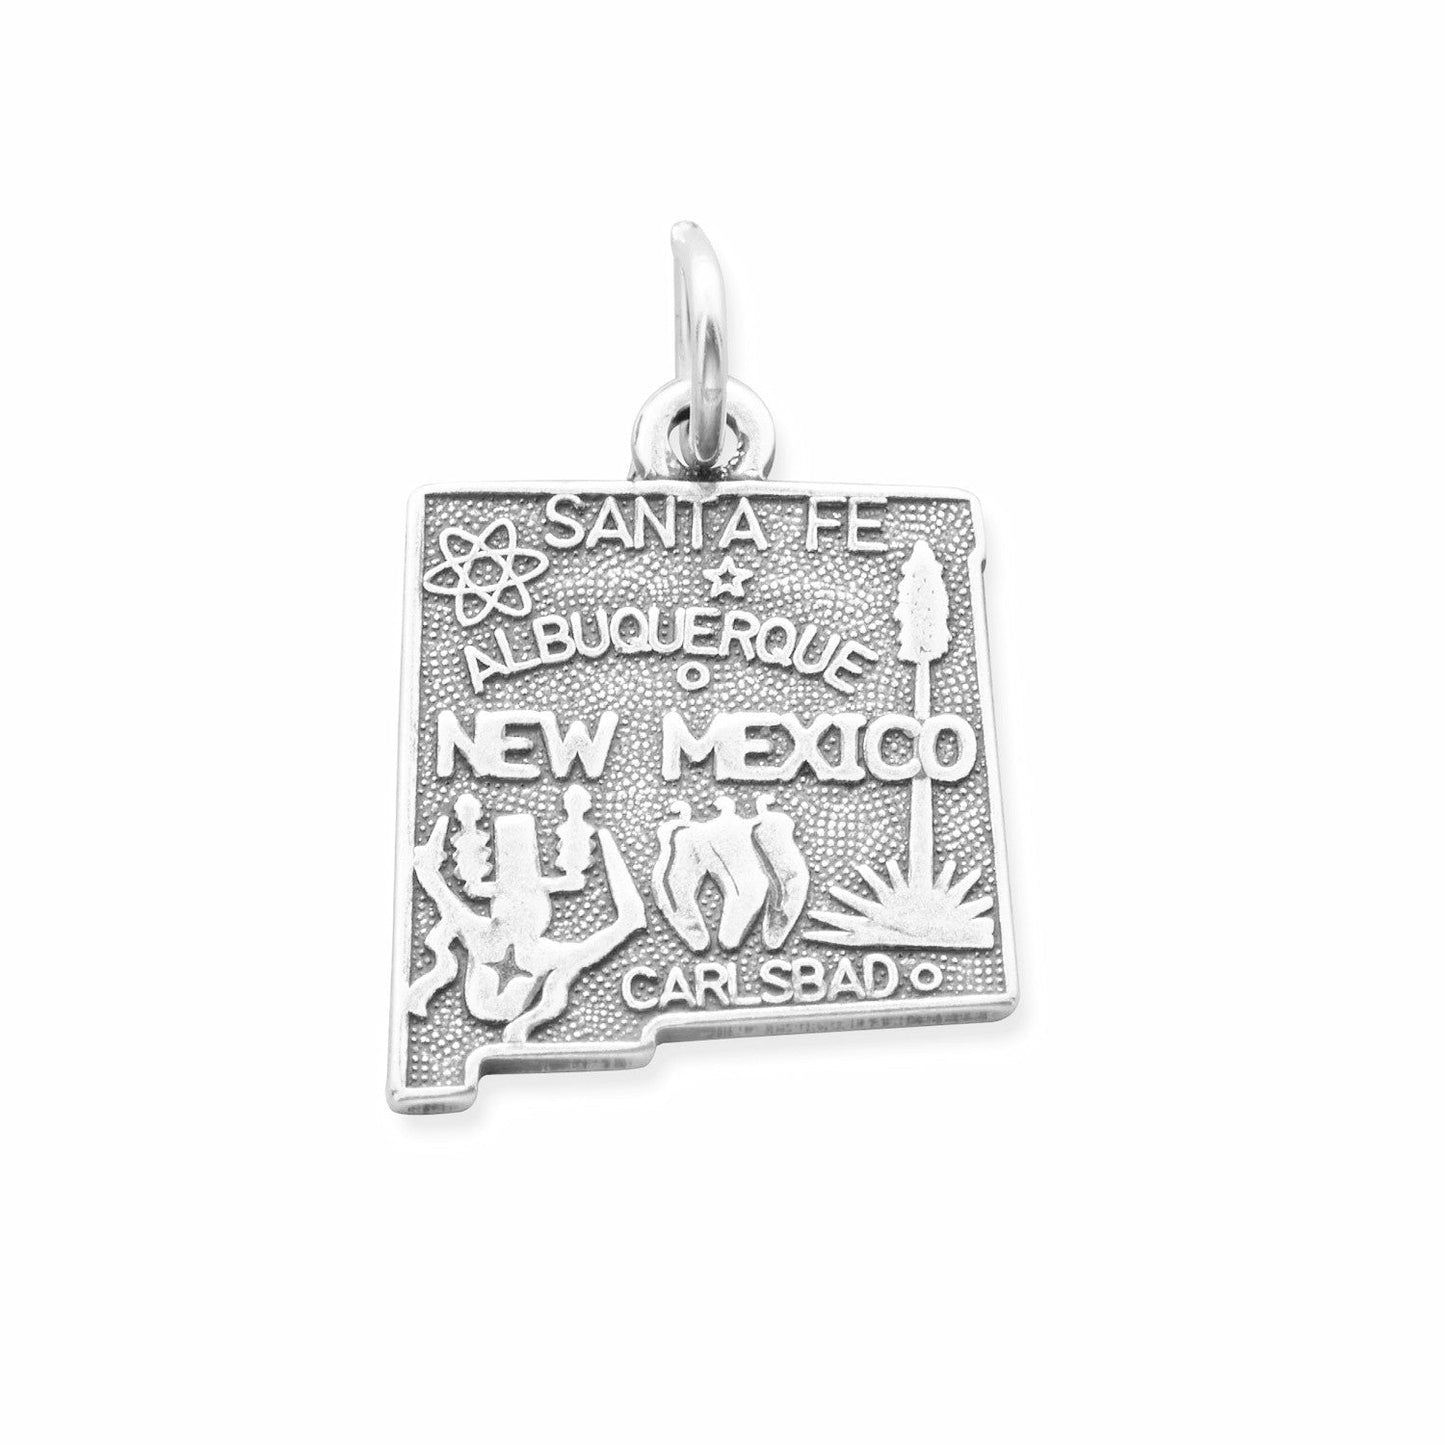 Oxidized Sterling Silver New Mexico State Charm, Made in USA